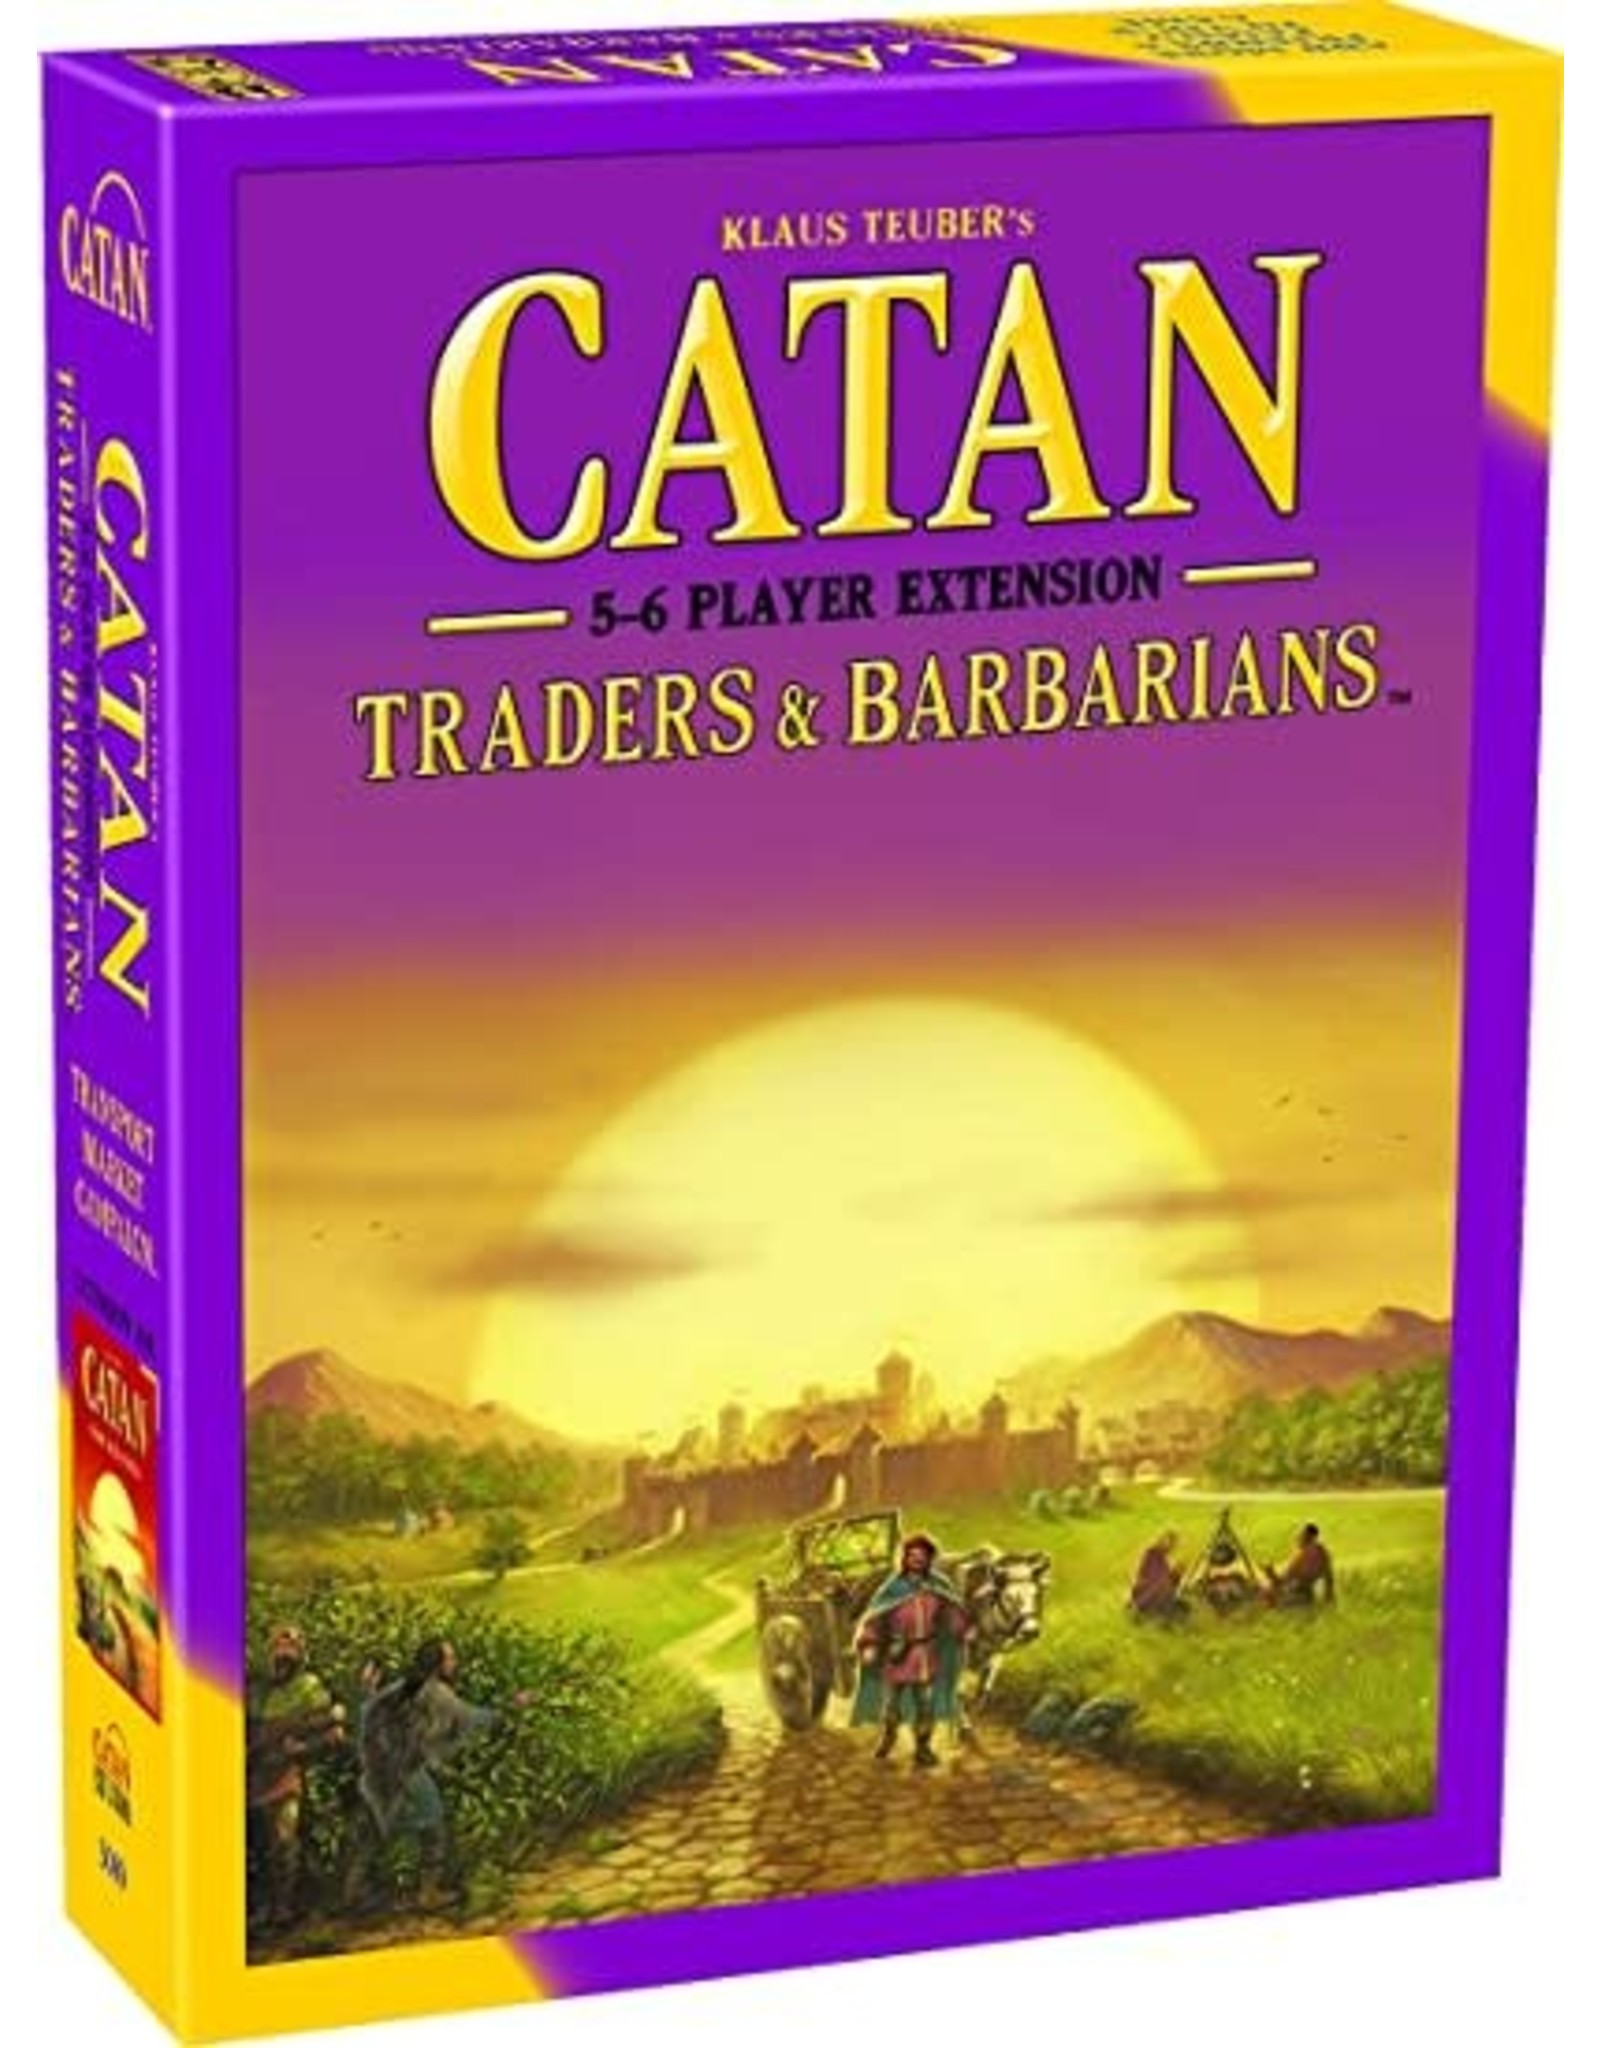 Catan Studio Catan Traders & Barbarians 5 to 6 Player Extension